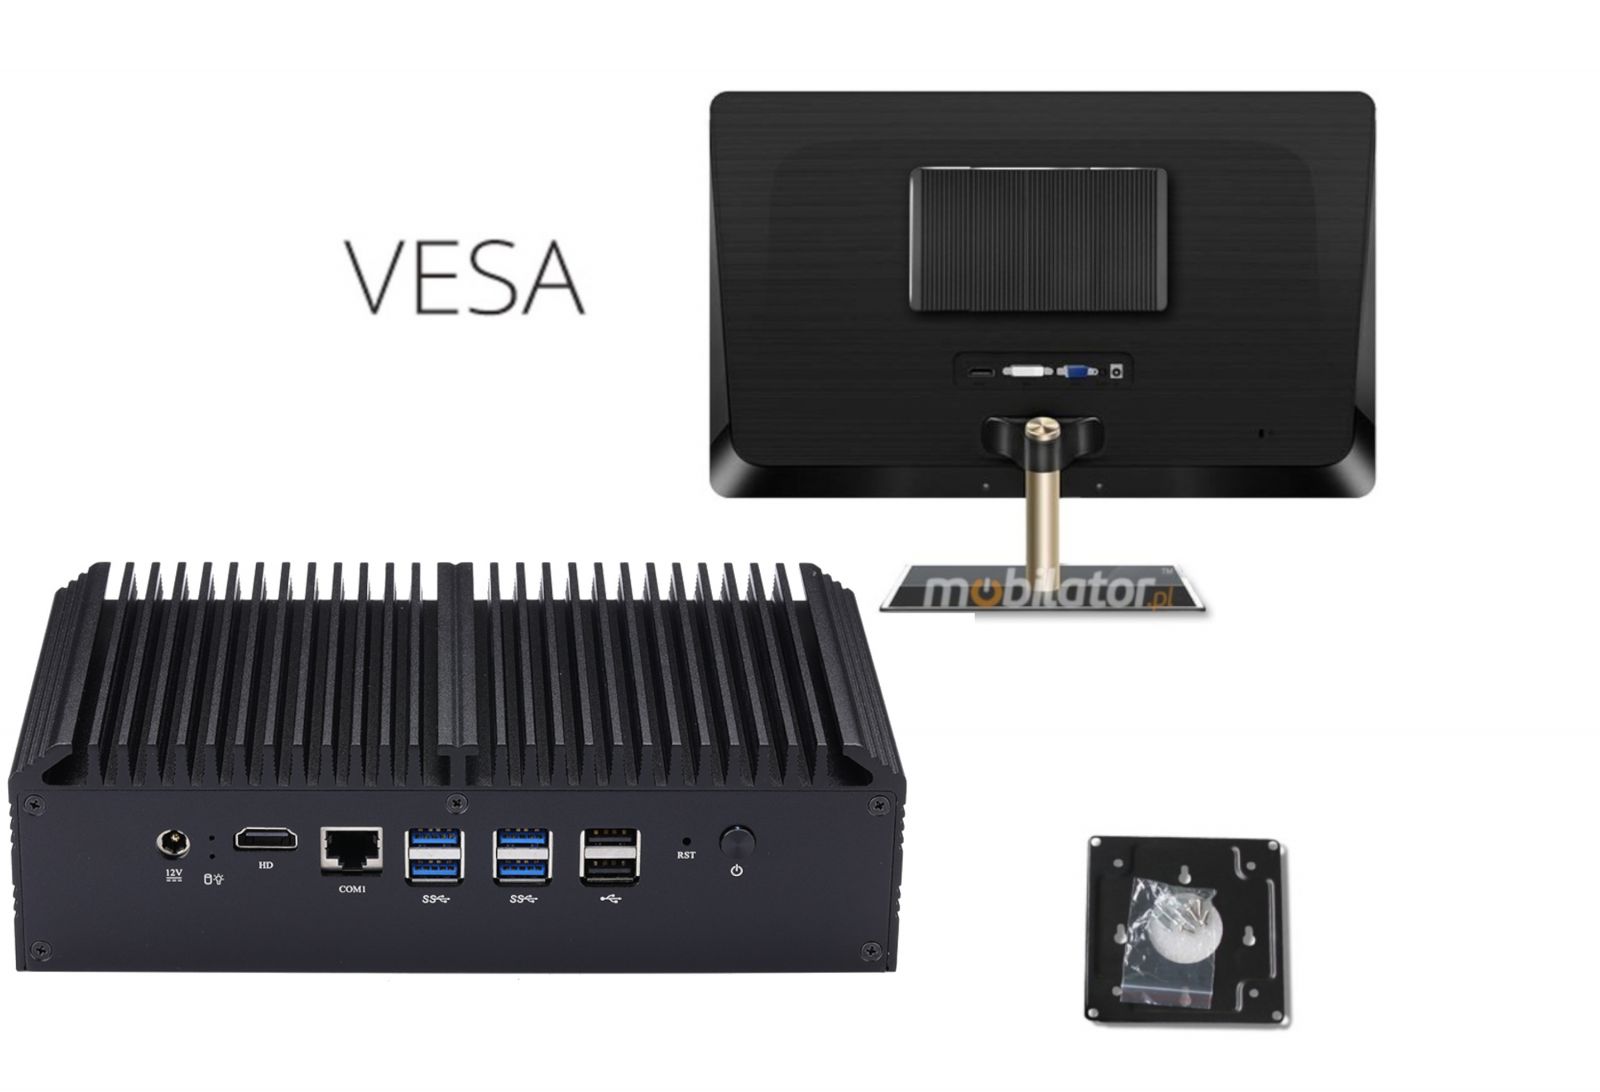 Mounting of the MiniPC Q838GE with the VESA bracket possible